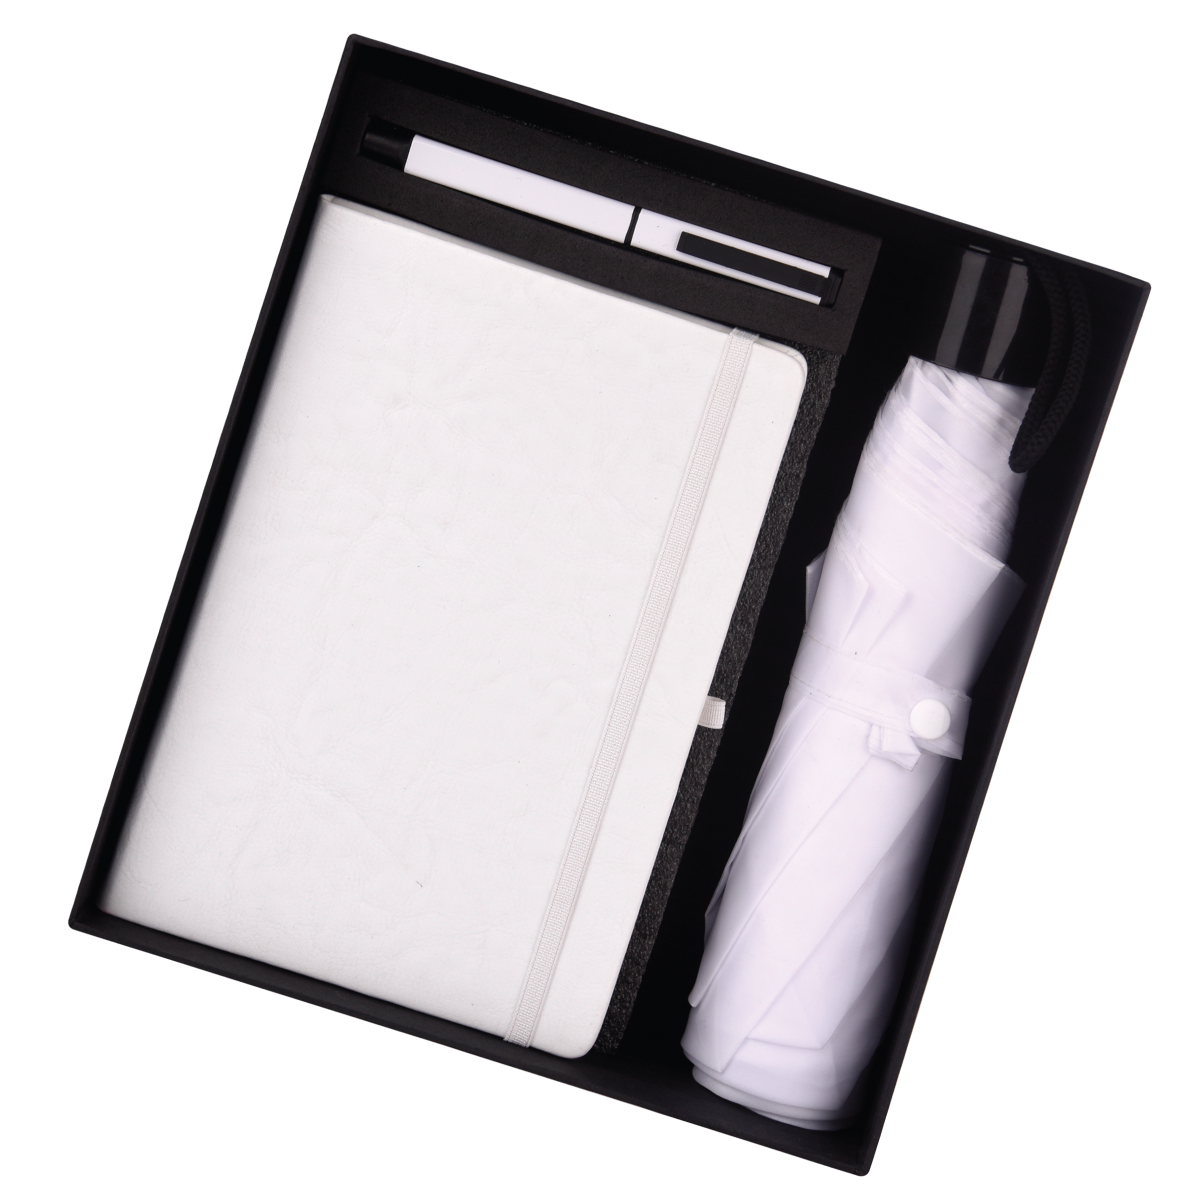 White 3in1 Gift Set Umbrella, Notebook Diary, and Pen - For Employee Joining Kit, Corporate, Client or Dealer Gifting HK37348